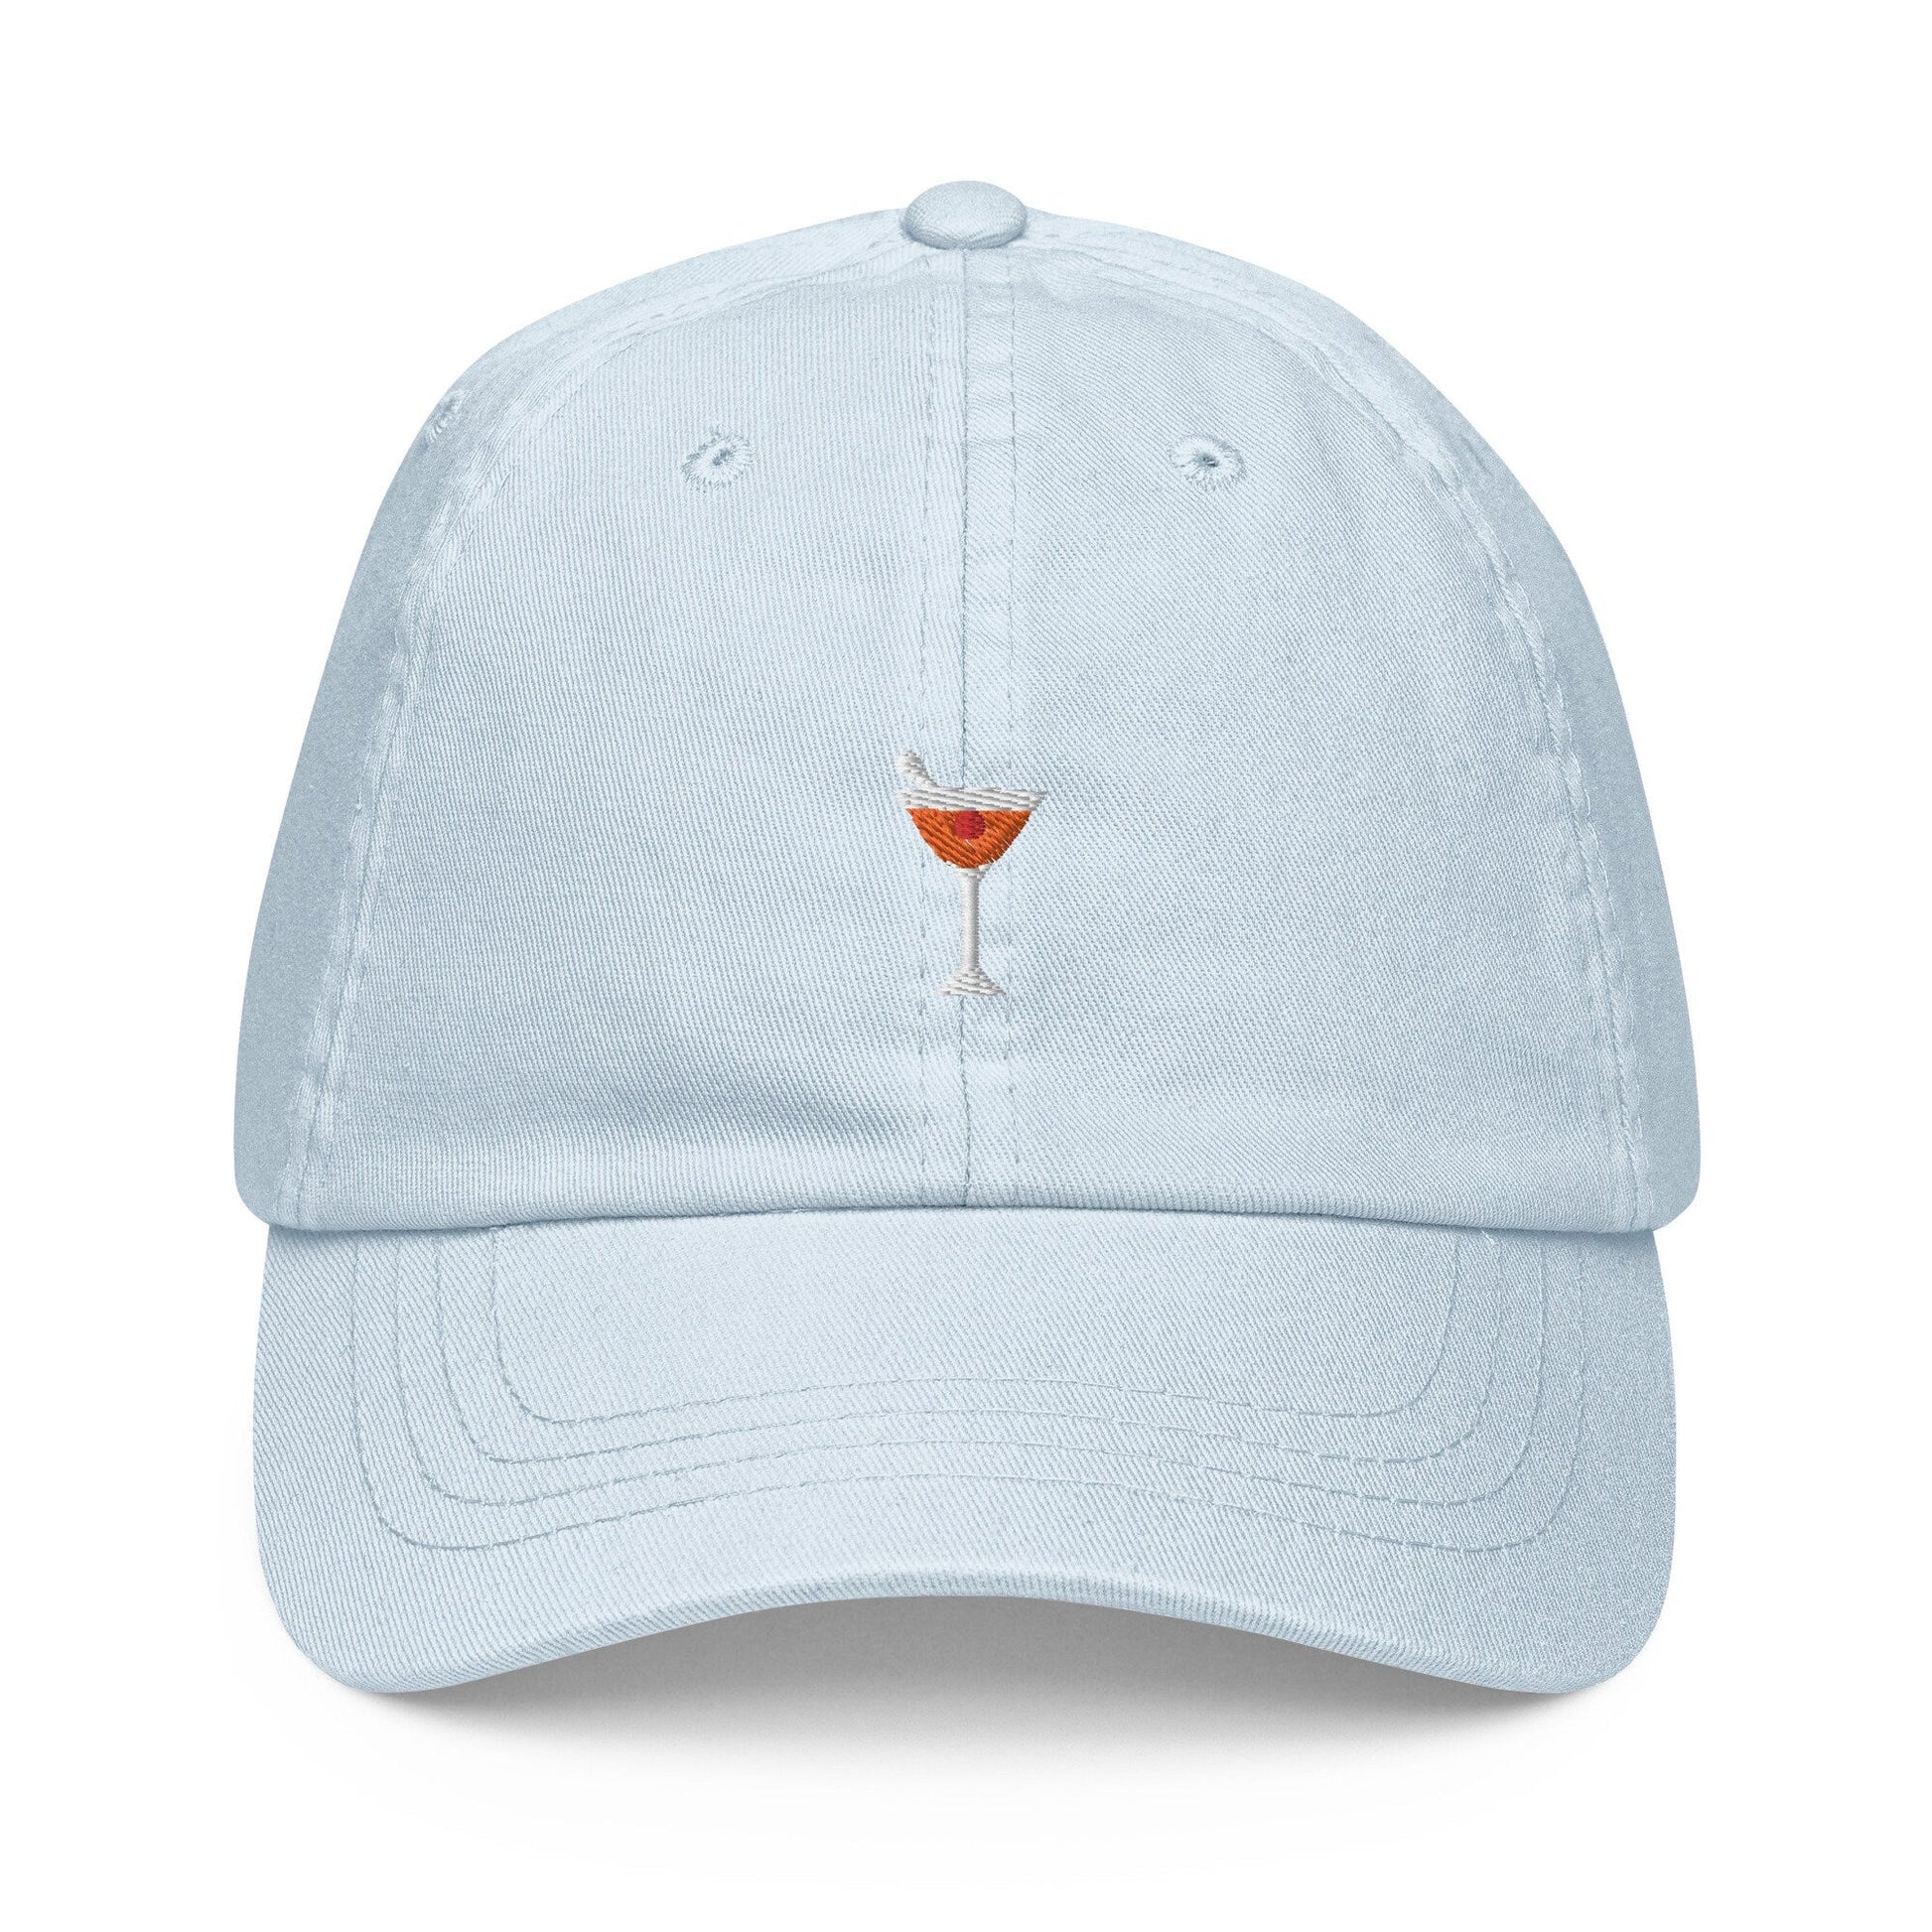 Manhattan Dad Hat - Gift for whisky cherry vermouth cocktail lovers - Embroidered Cotton Cap - Evilwater Originals